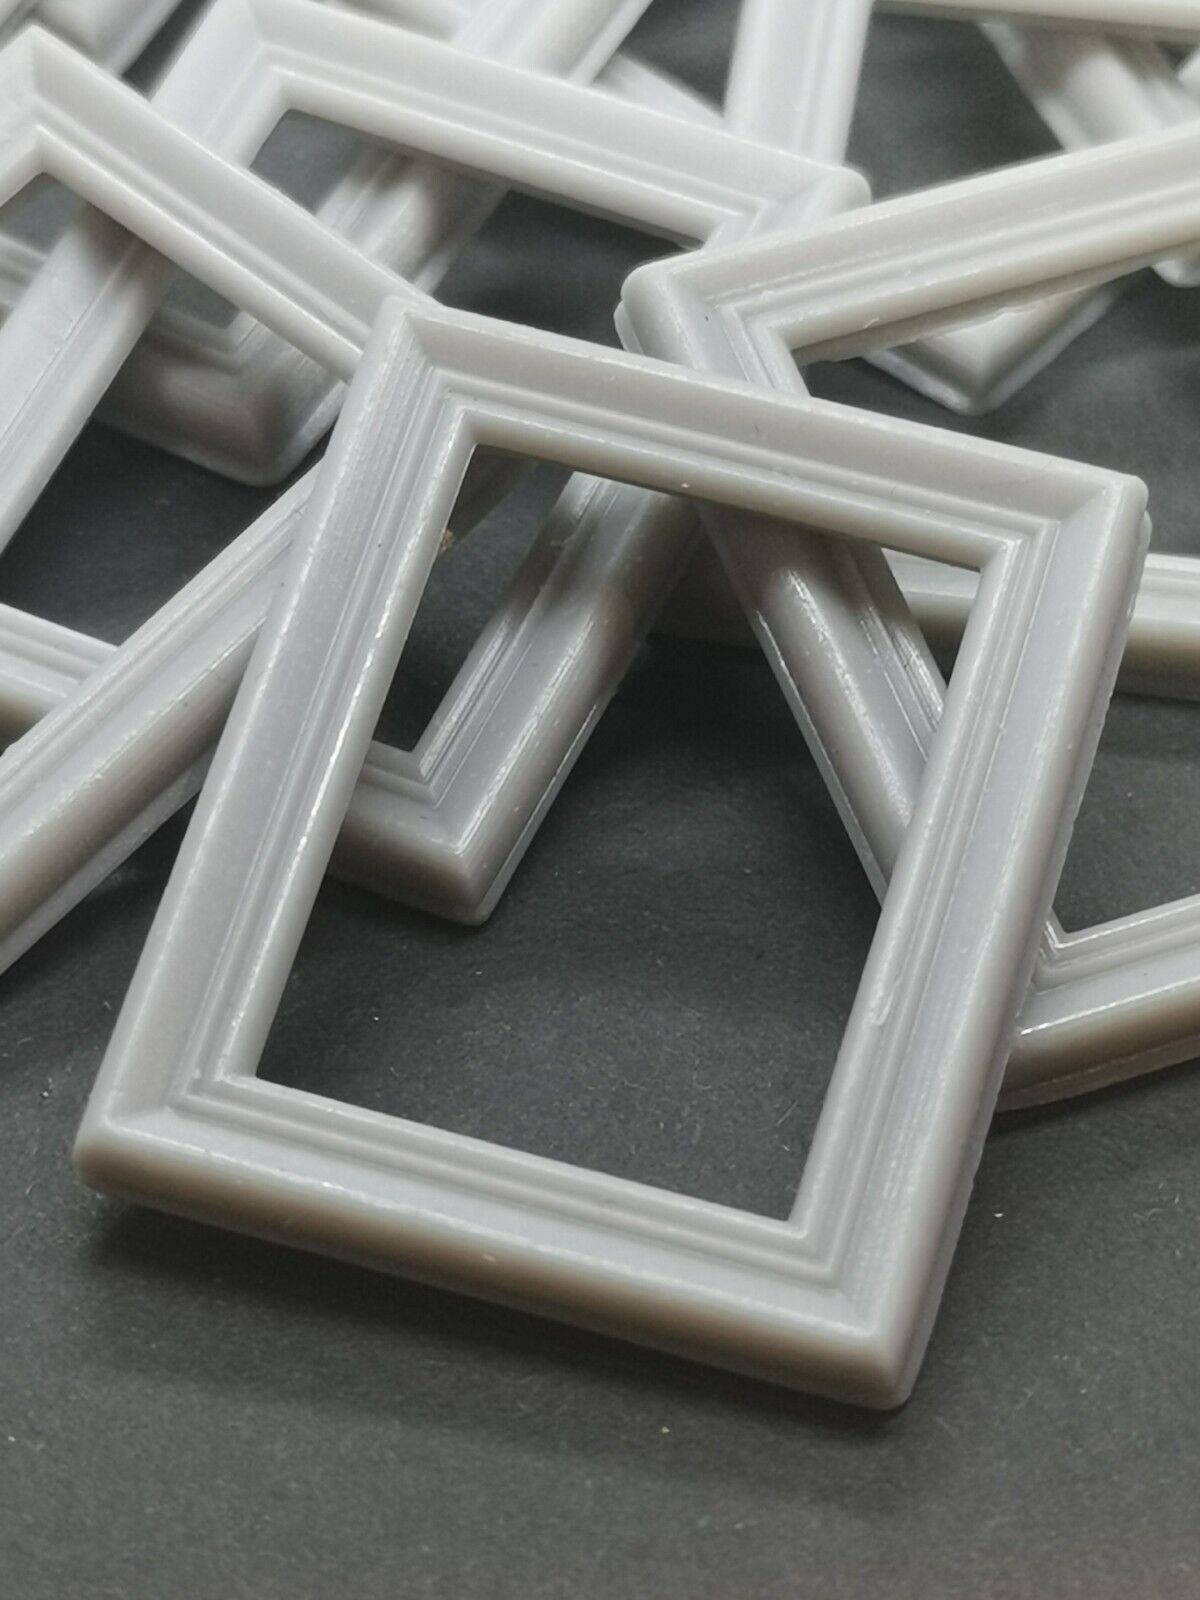 18 x Miniature Picture frames - 28mm x 34mm x 4mm with 2mm rebate on reverse.